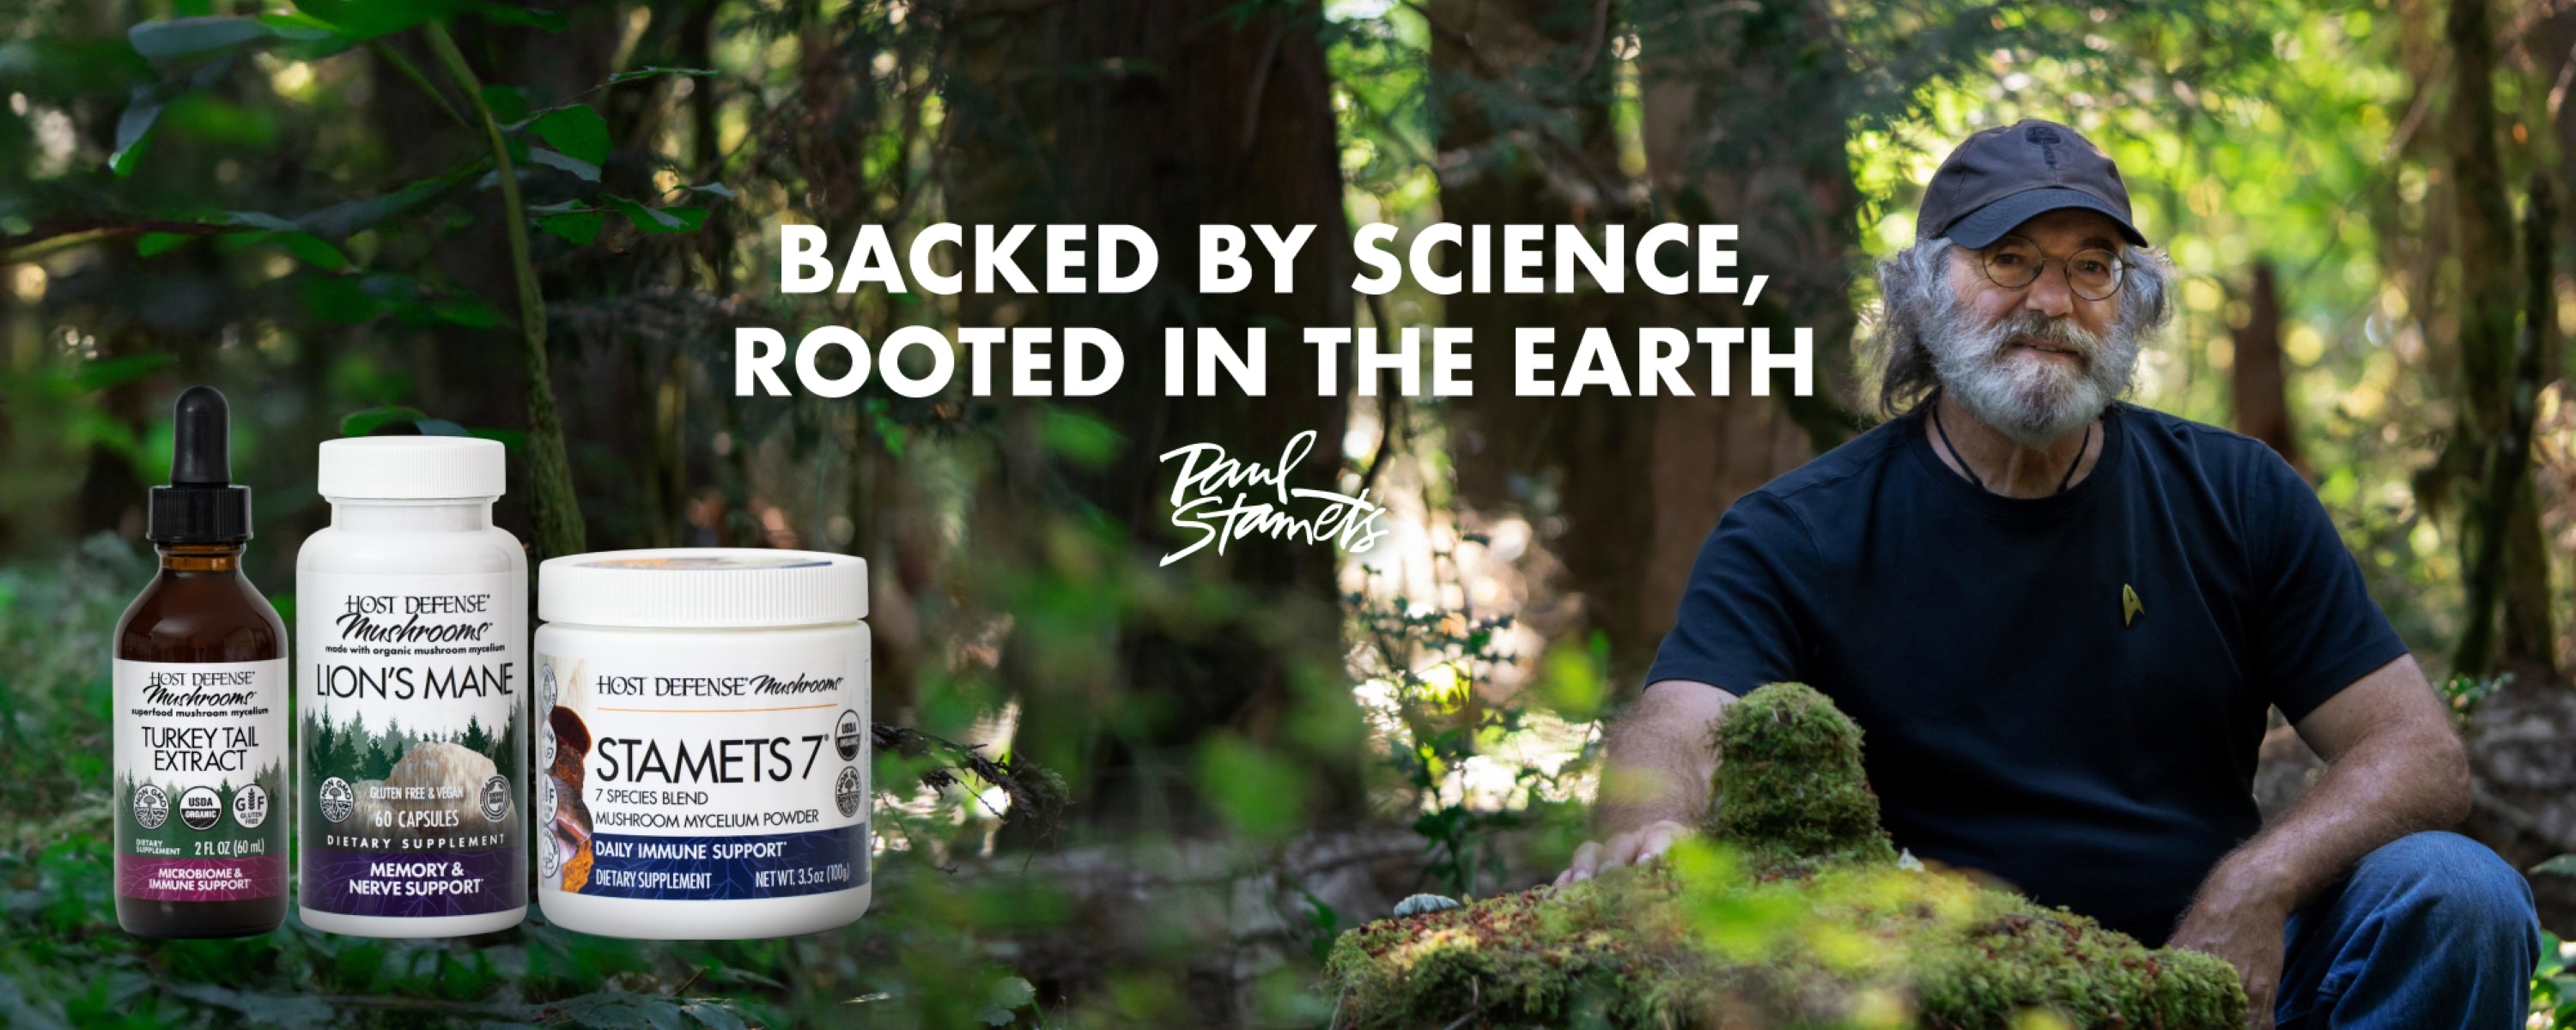 Backed by science, rooted in the earth